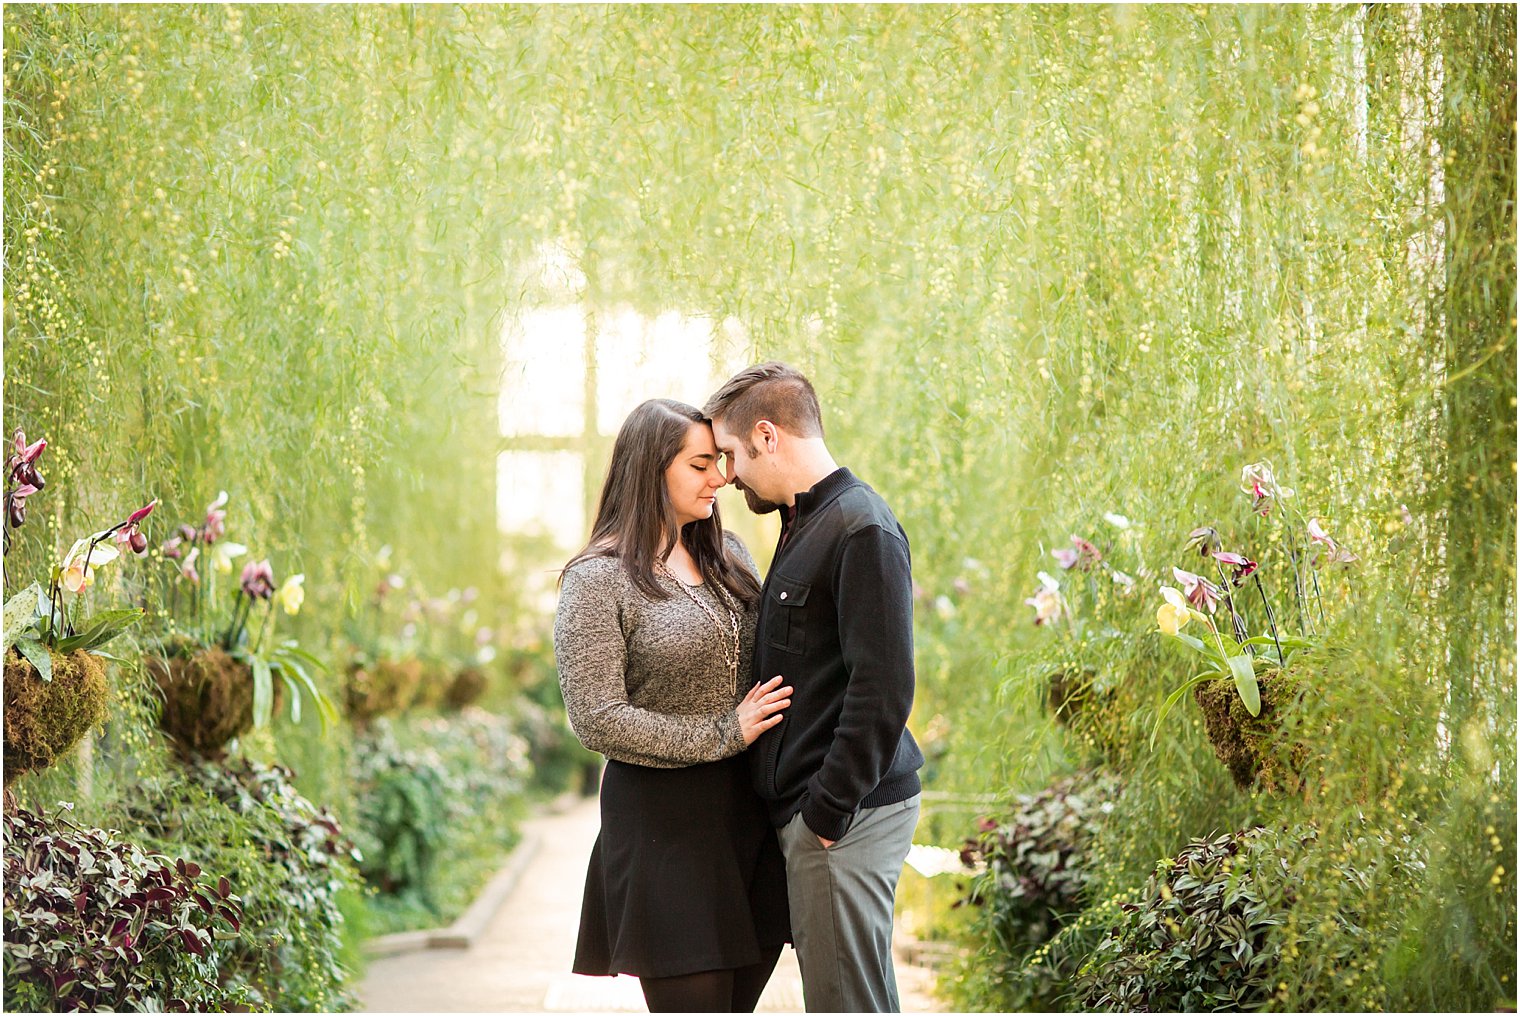 Romantic posing for engaged couples | Photo by Idalia Photography